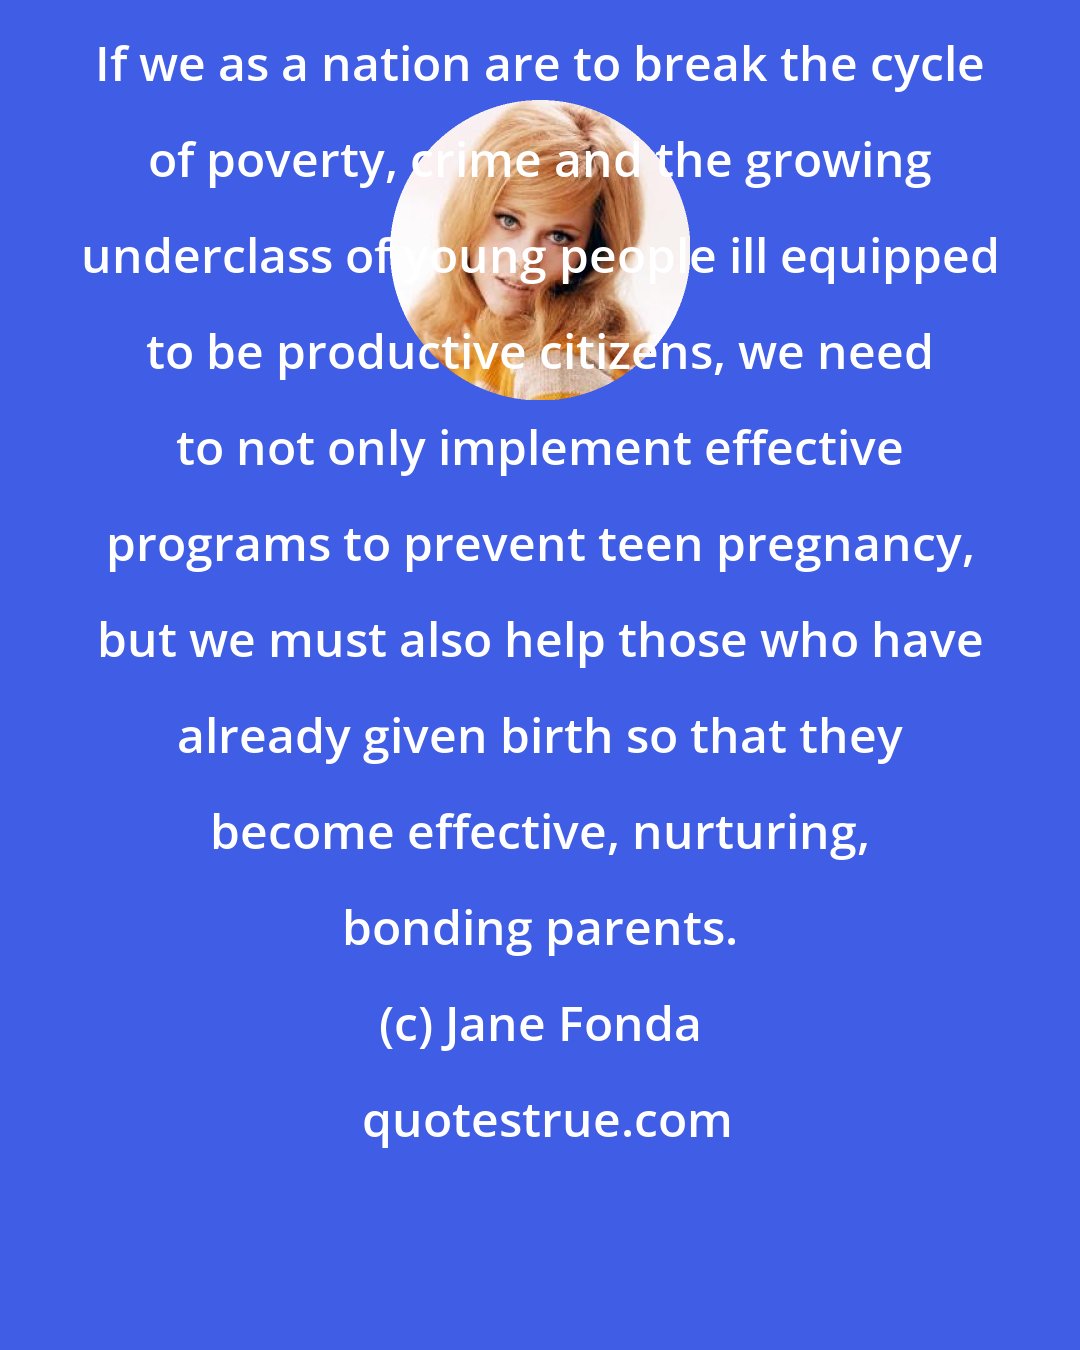 Jane Fonda: If we as a nation are to break the cycle of poverty, crime and the growing underclass of young people ill equipped to be productive citizens, we need to not only implement effective programs to prevent teen pregnancy, but we must also help those who have already given birth so that they become effective, nurturing, bonding parents.